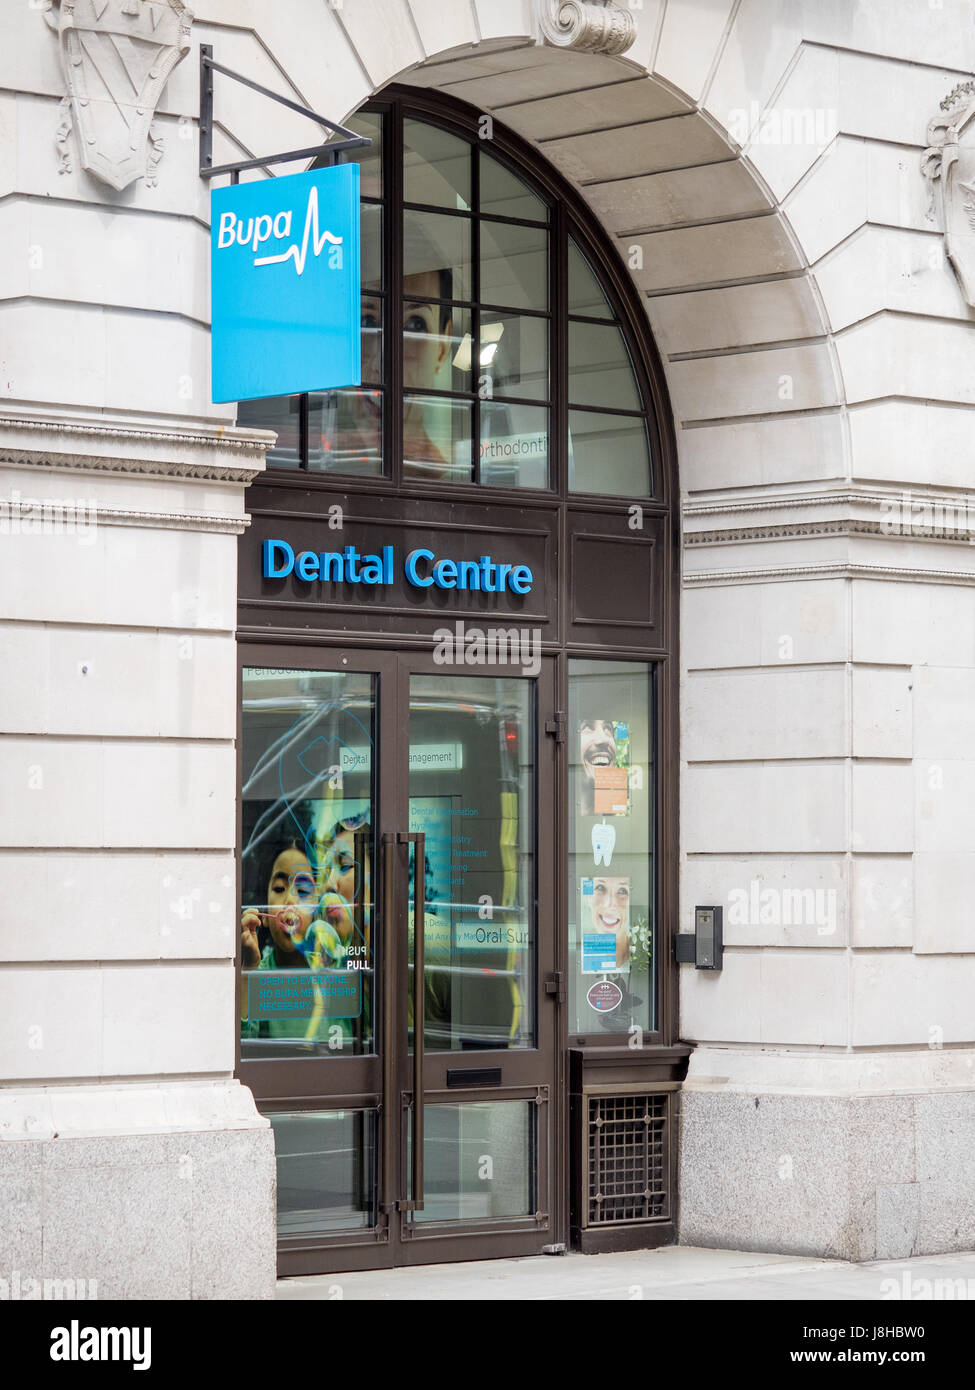 Bupa Private Healthcare Dental Centre on Cornhill in the City of London financial district. Stock Photo